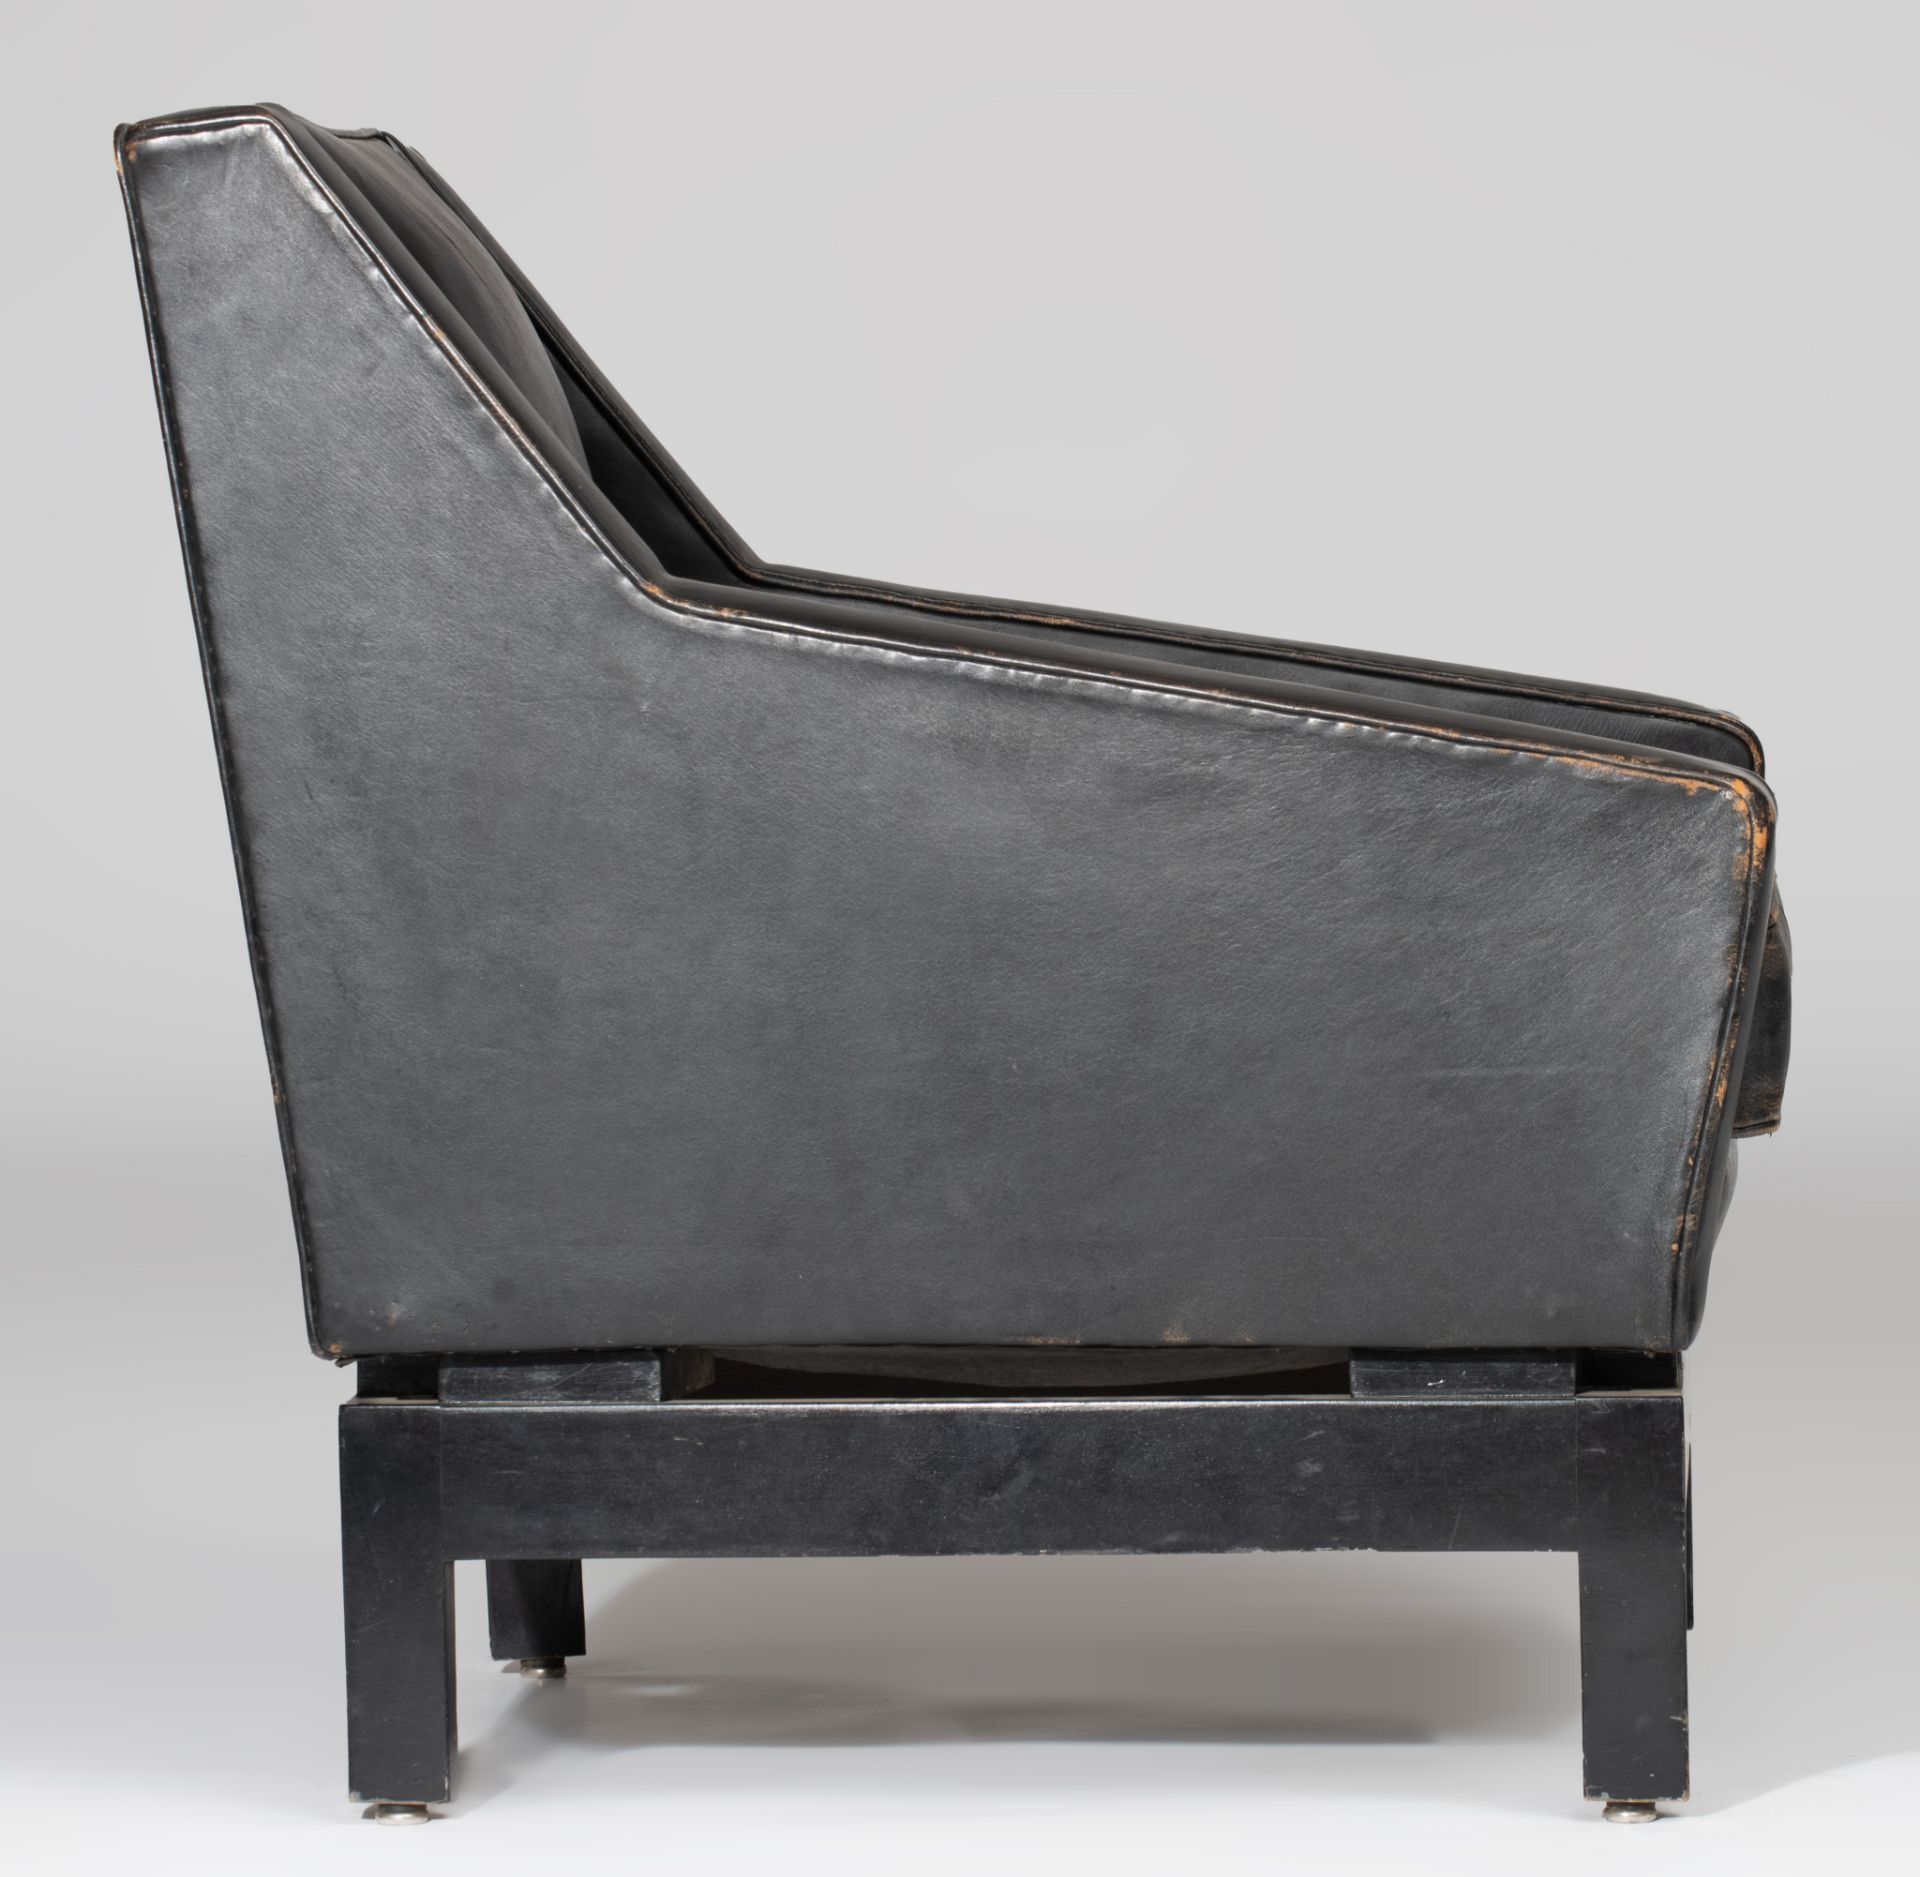 A Verraneman armchair, black leather on a black lacquered wooden frame, 1957, H 76 - W 72 cm - Image 7 of 11